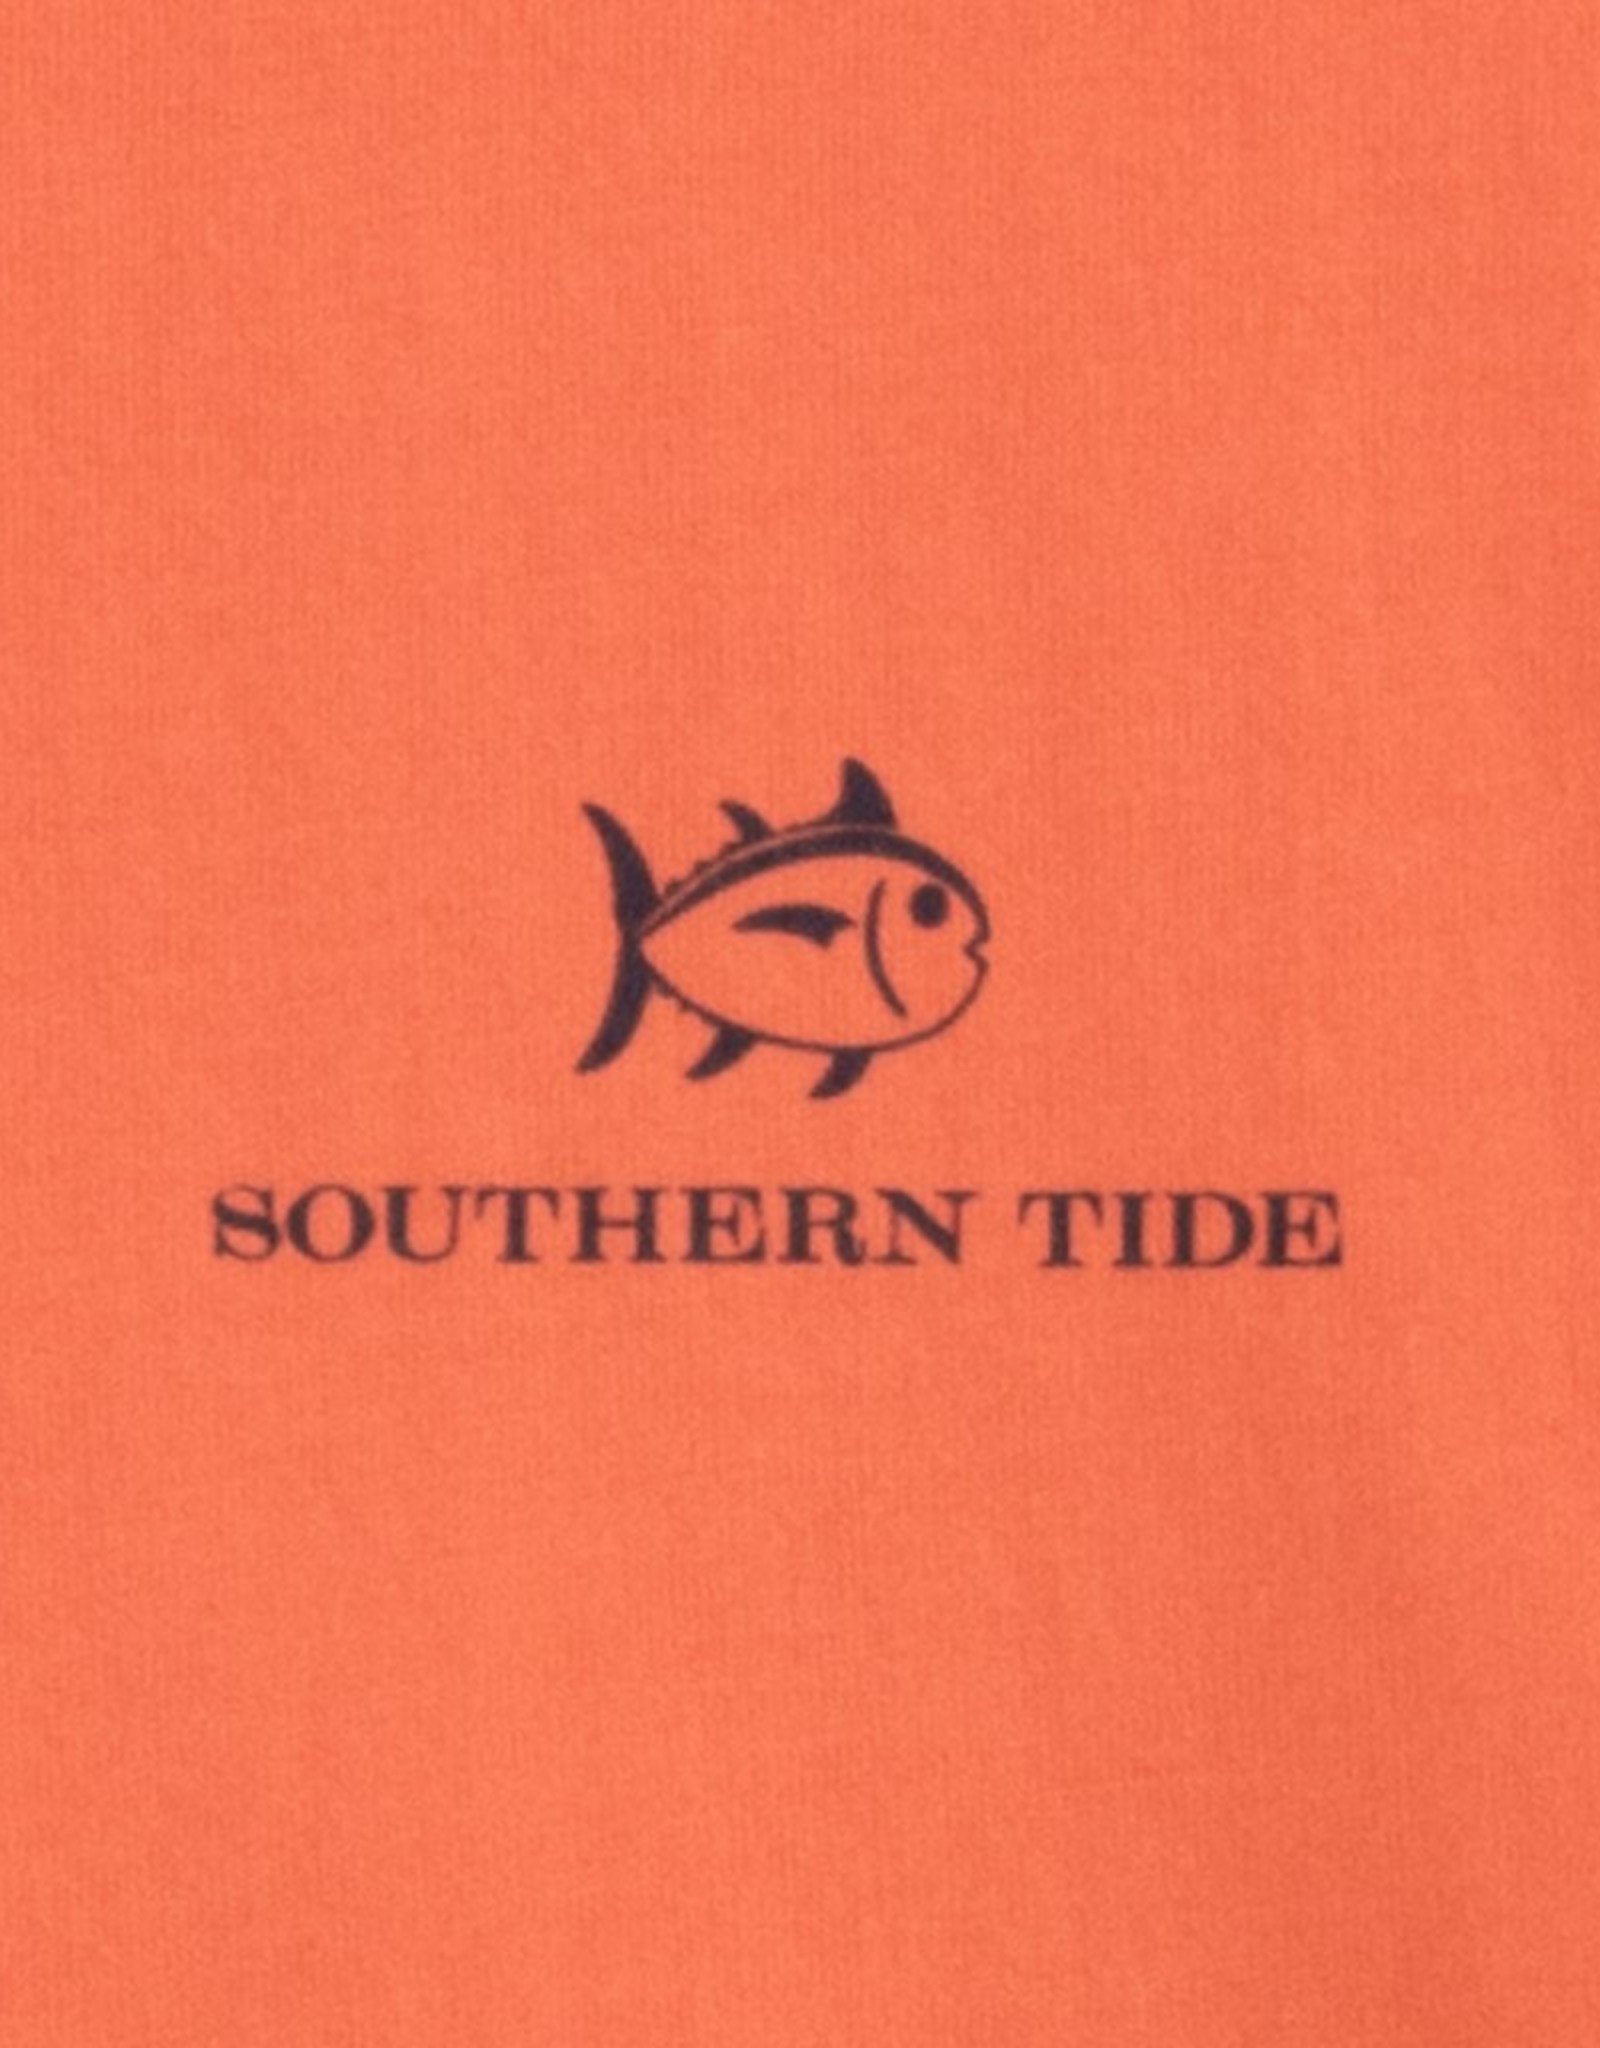 Southern Tide Paddlboard Sunset Fll Tee